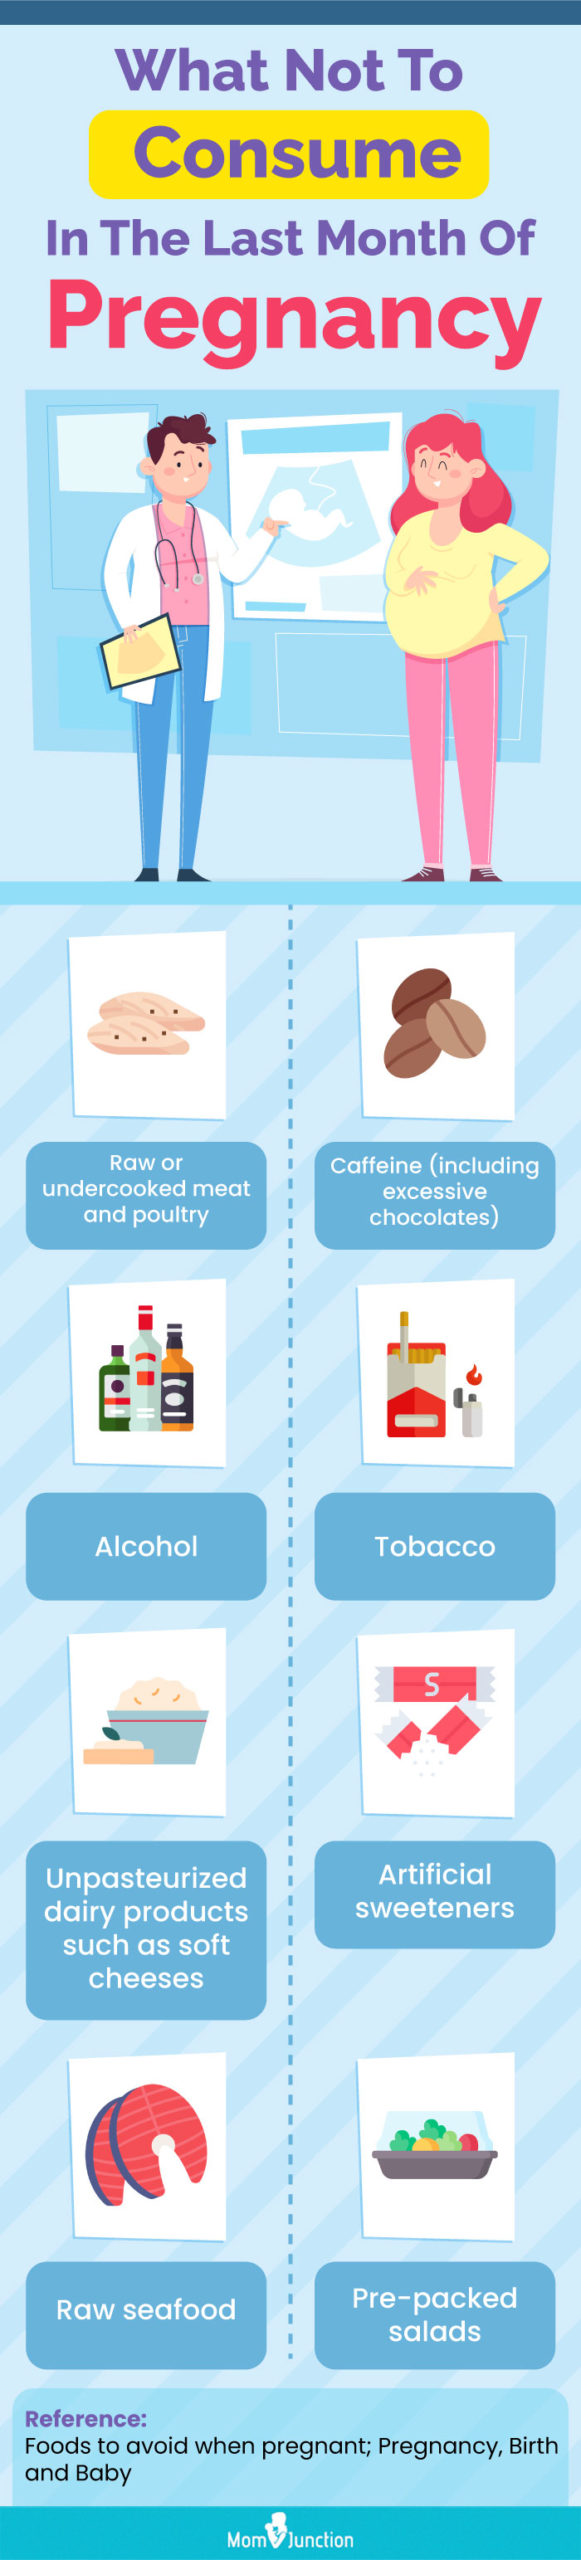 what not to consume in the last month of pregnancy (infographic)